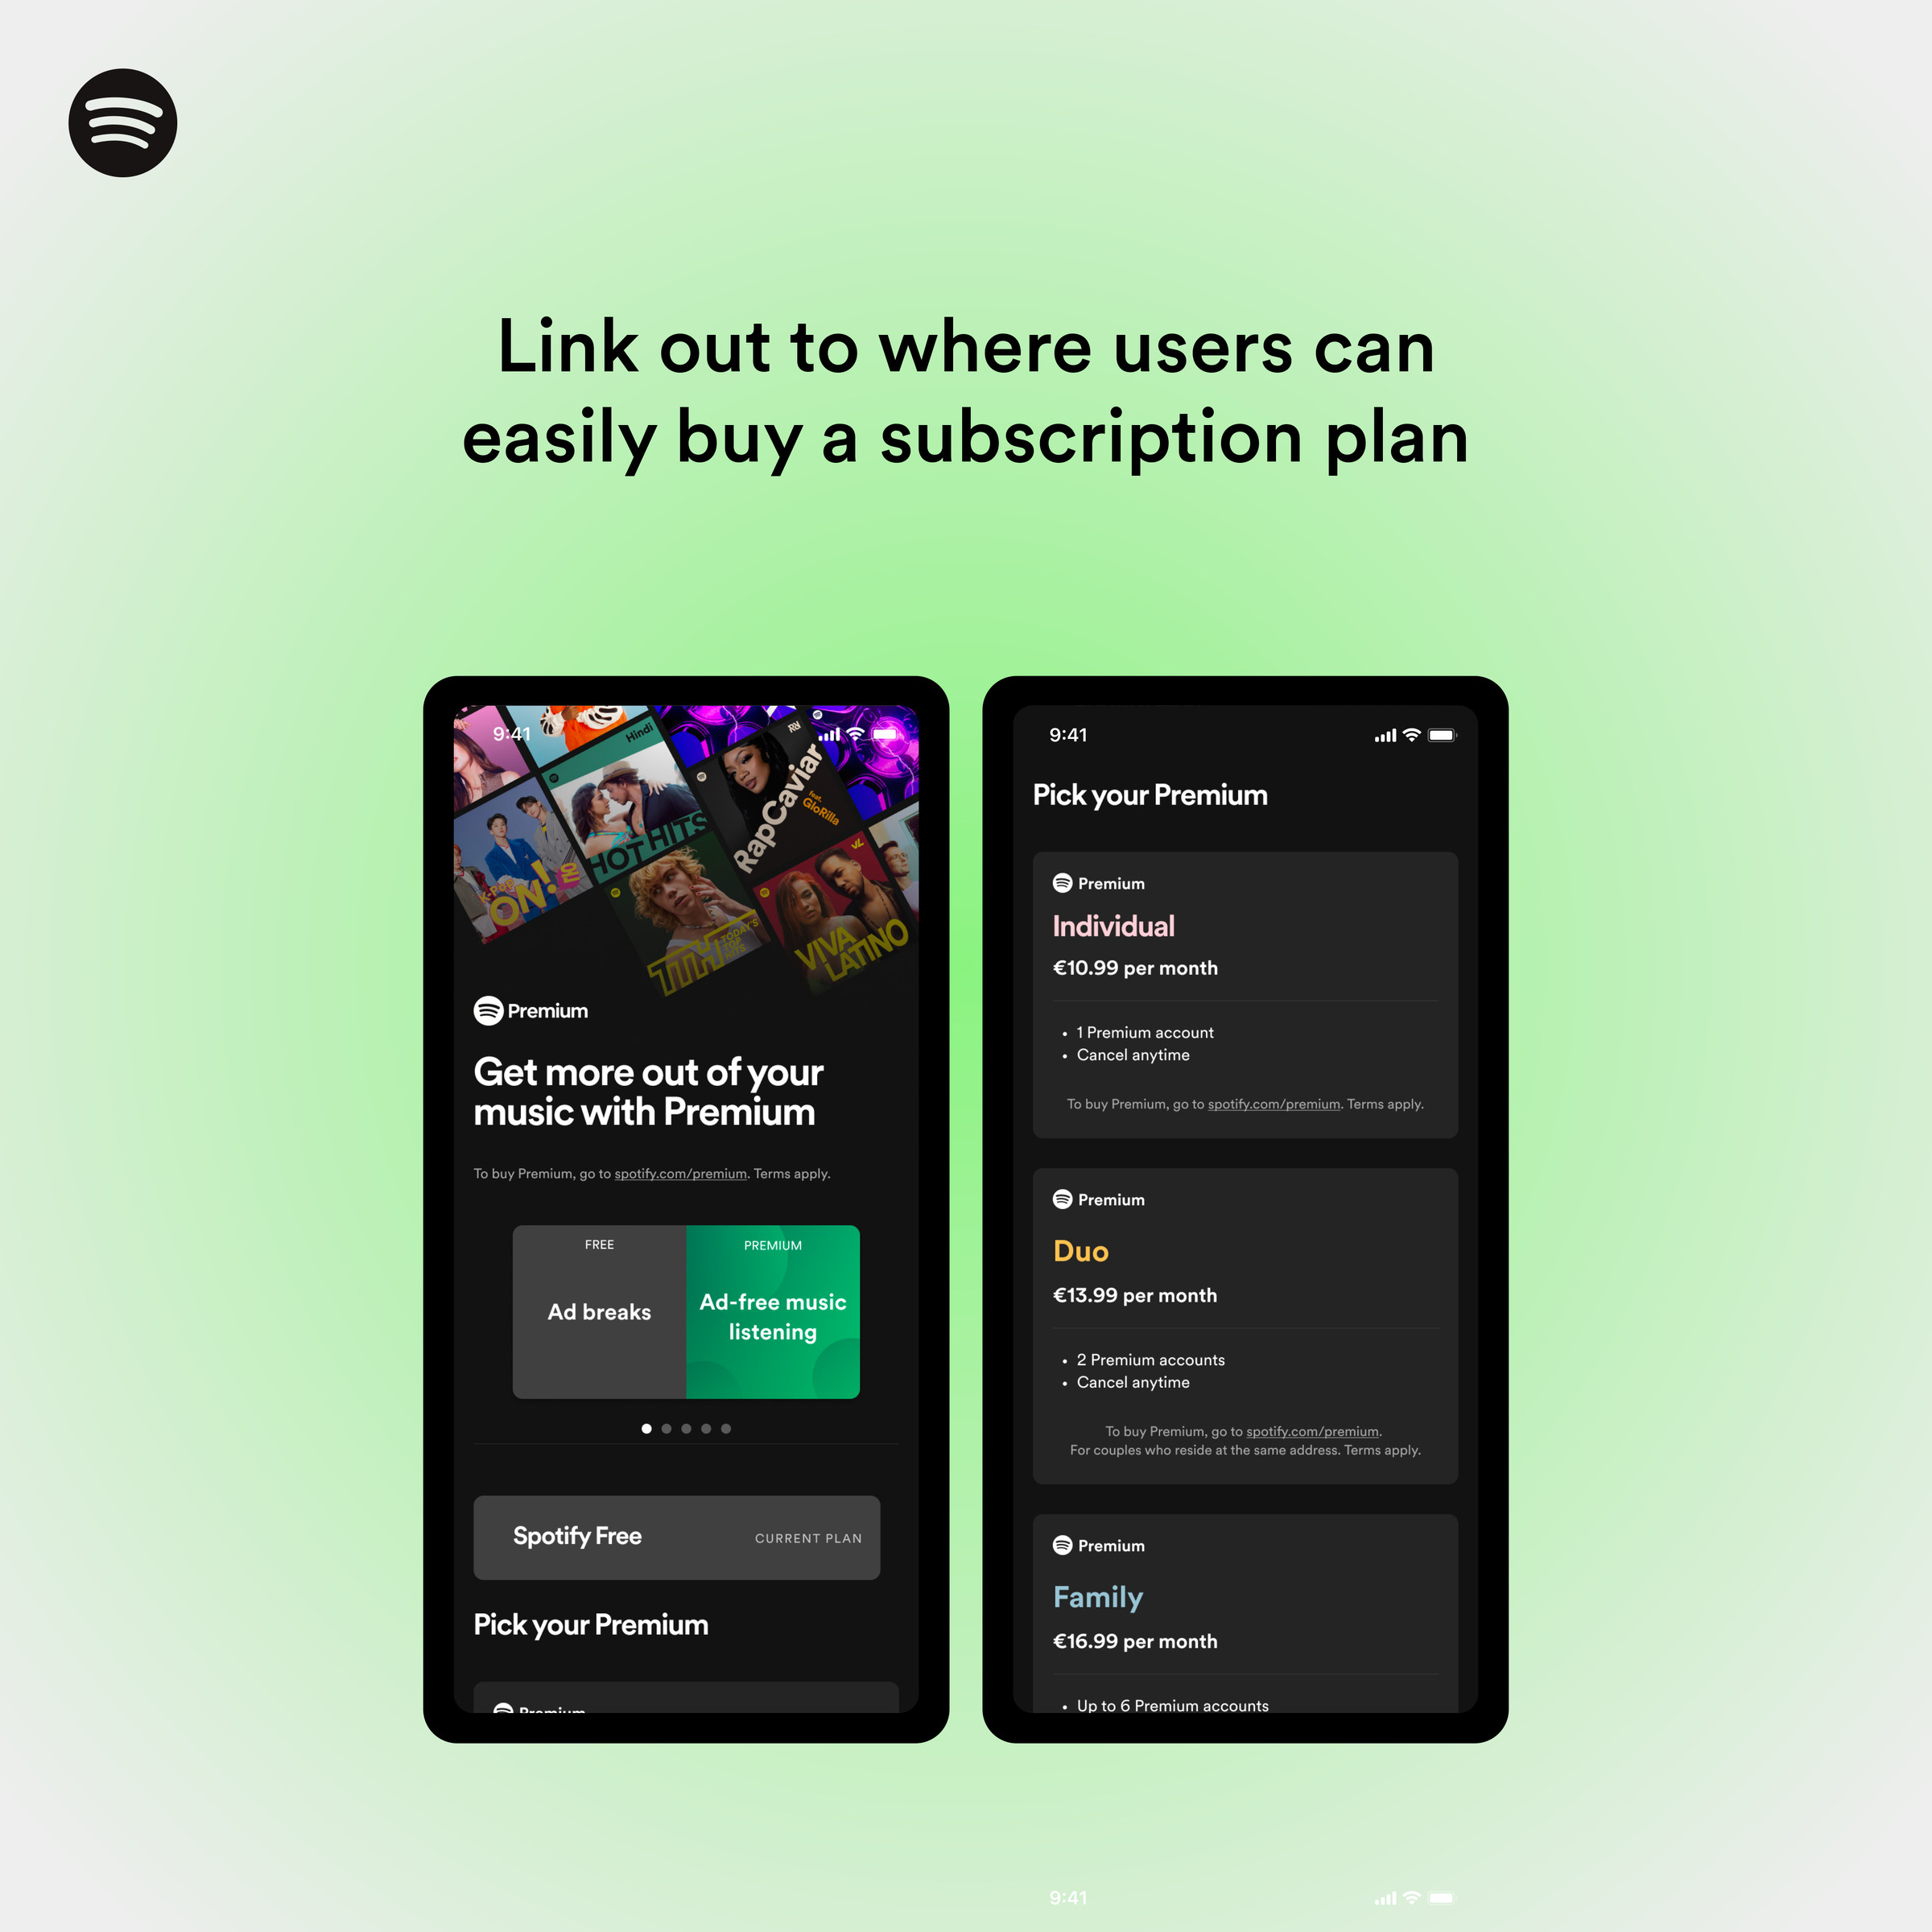 Spotify’s update includes pricing information and links to subscriptions.